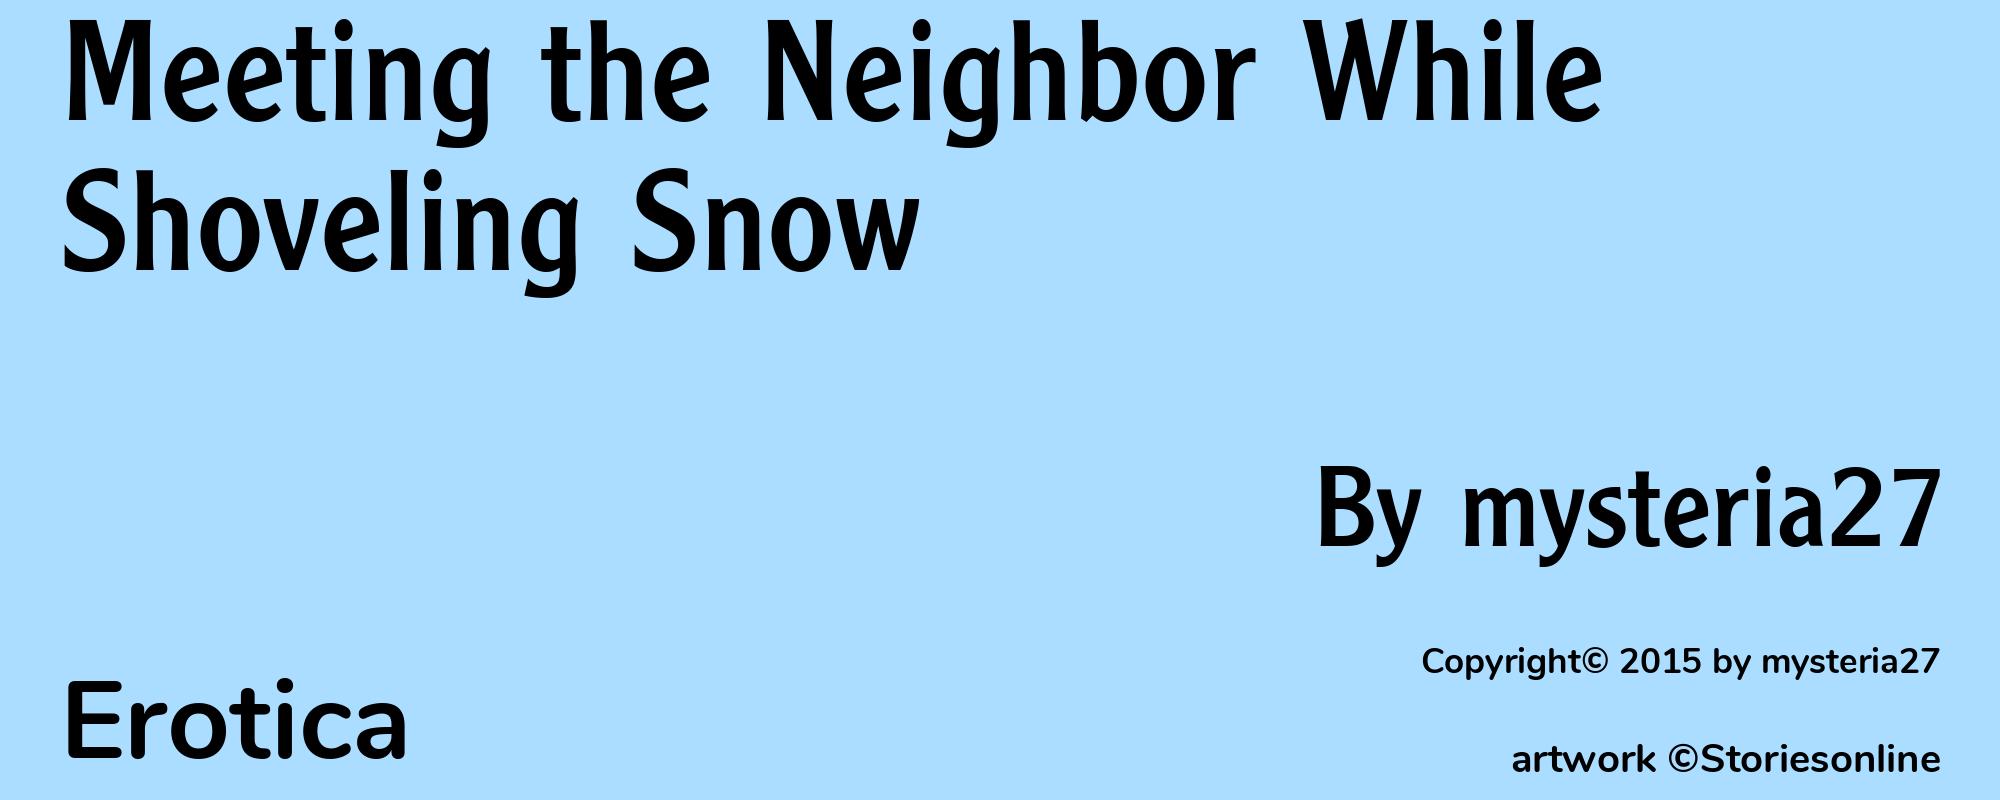 Meeting the Neighbor While Shoveling Snow - Cover